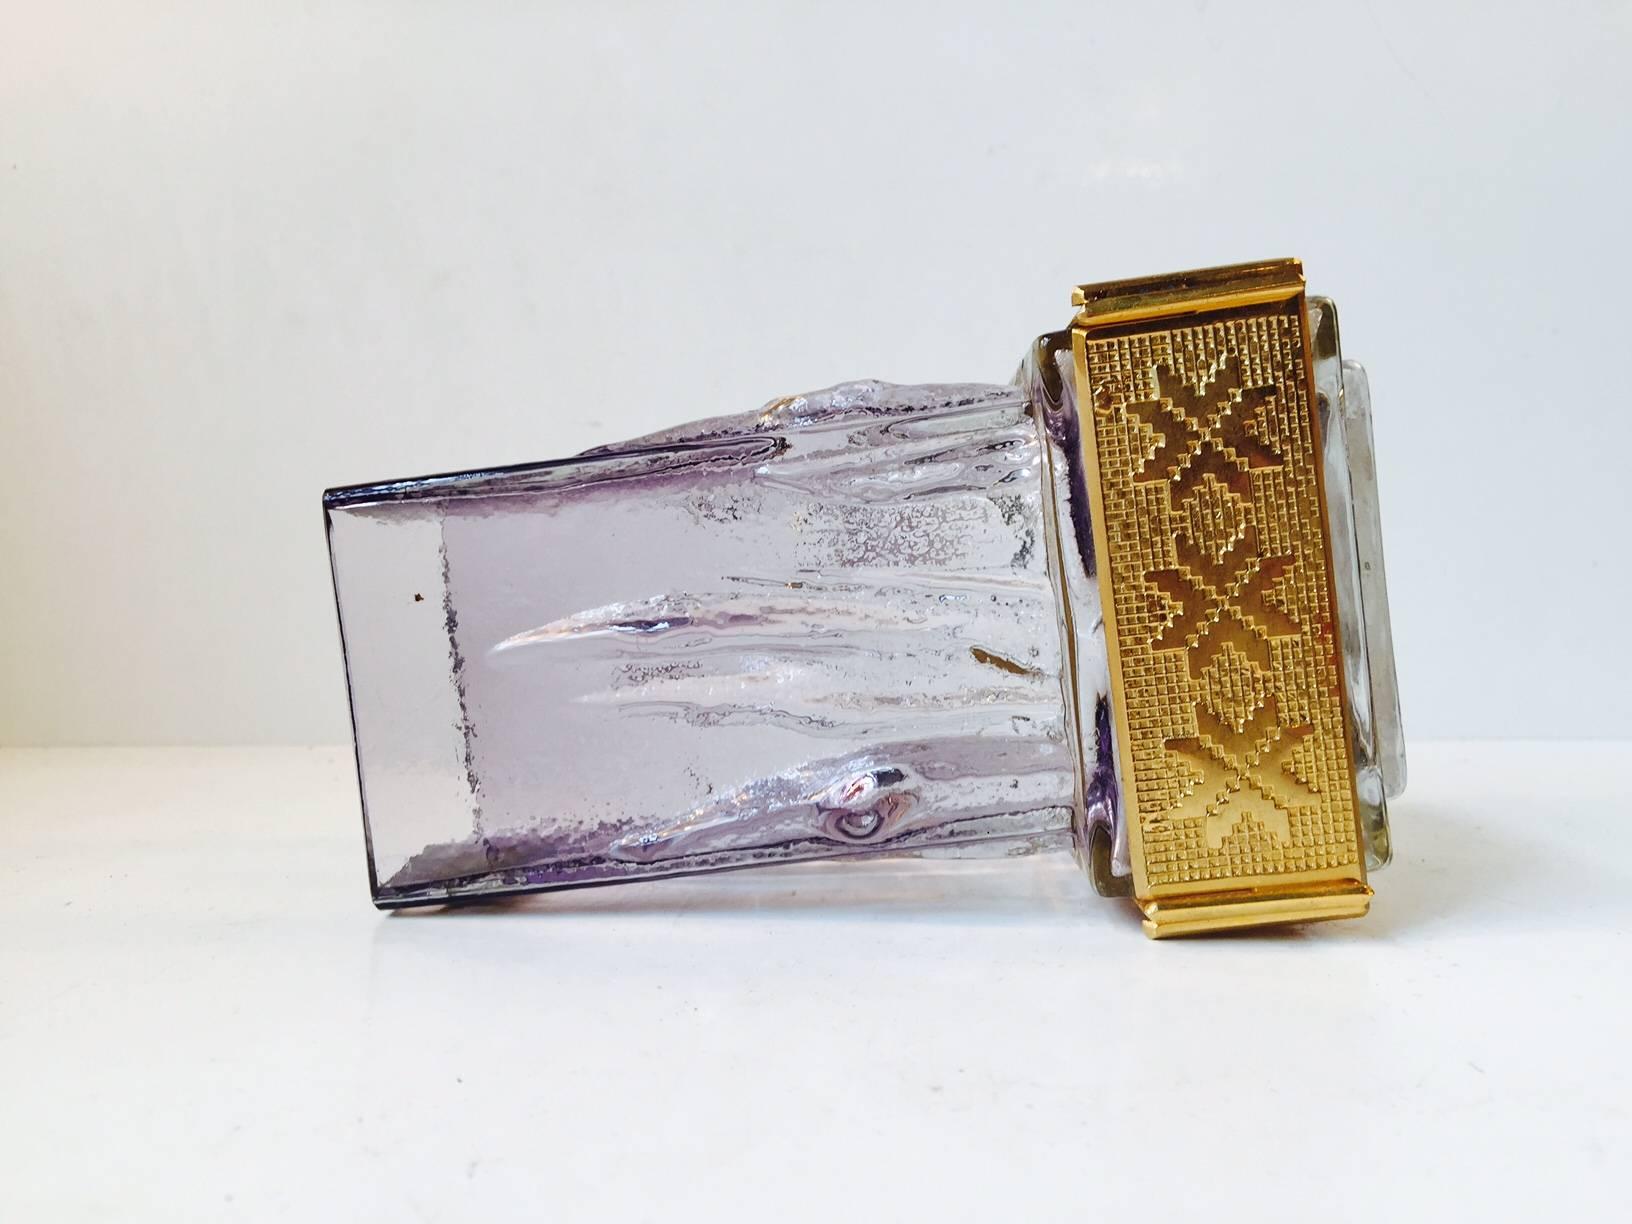 Amethyst textured Purple art glass vase set with geometric panels plated in 24-carat yellow gold. It is designed by Eino Wänni in 1974 and was manufactured at Oy Kumela in Finland during the 1970s. Signed by Artist and maker to the base. Mint